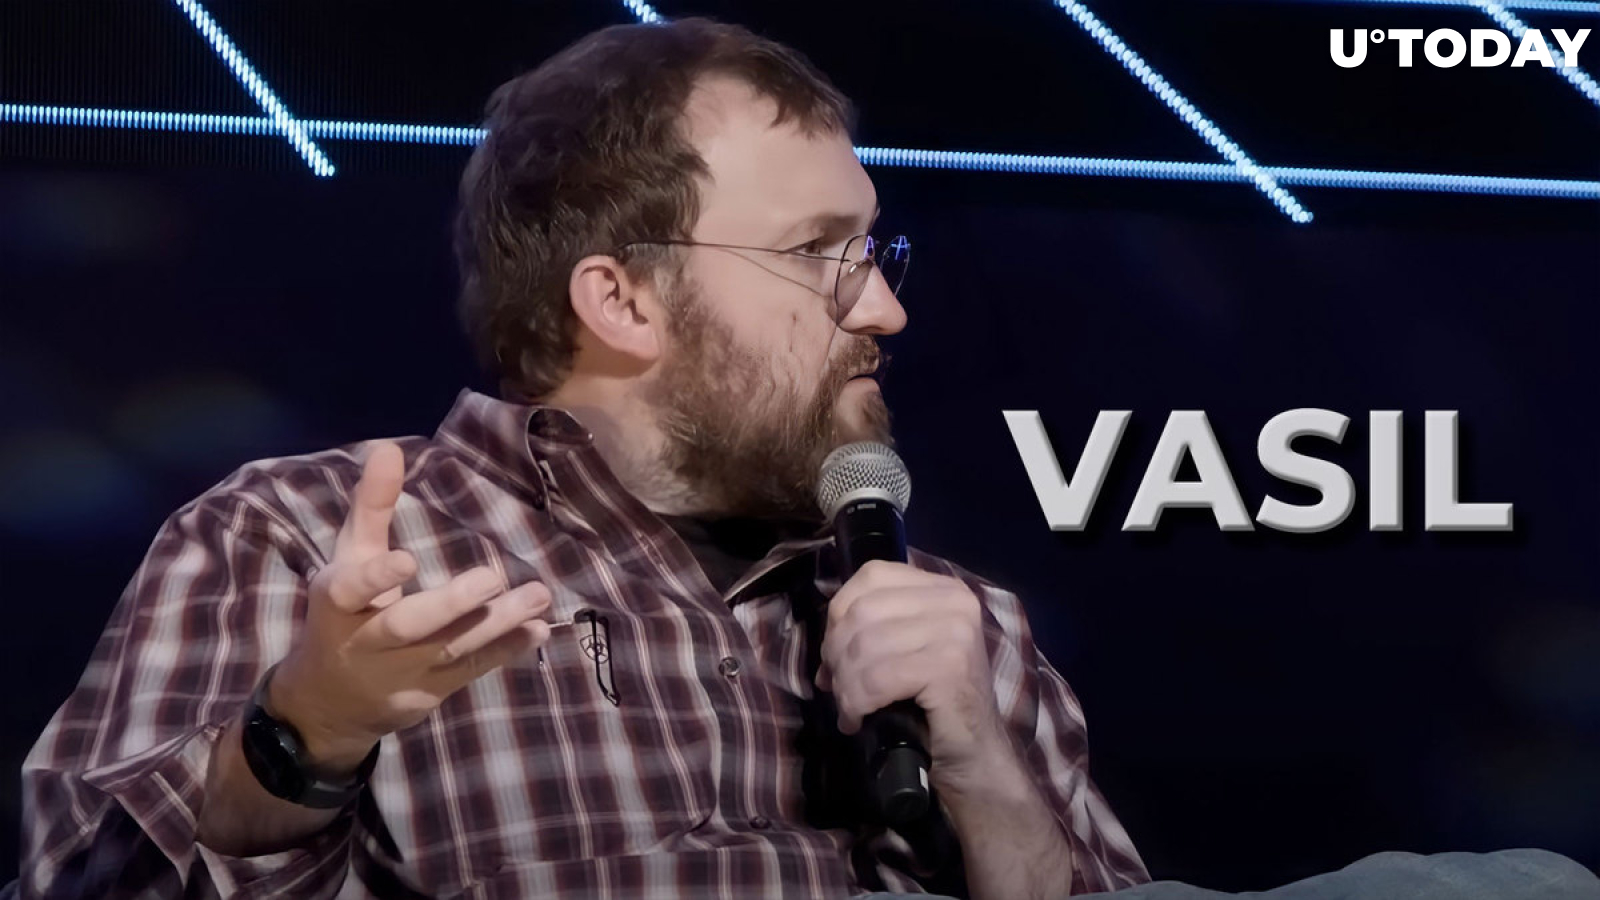 Charles Hoskinson: Here's What Effect Cardano's Vasil Upgrade Has Now